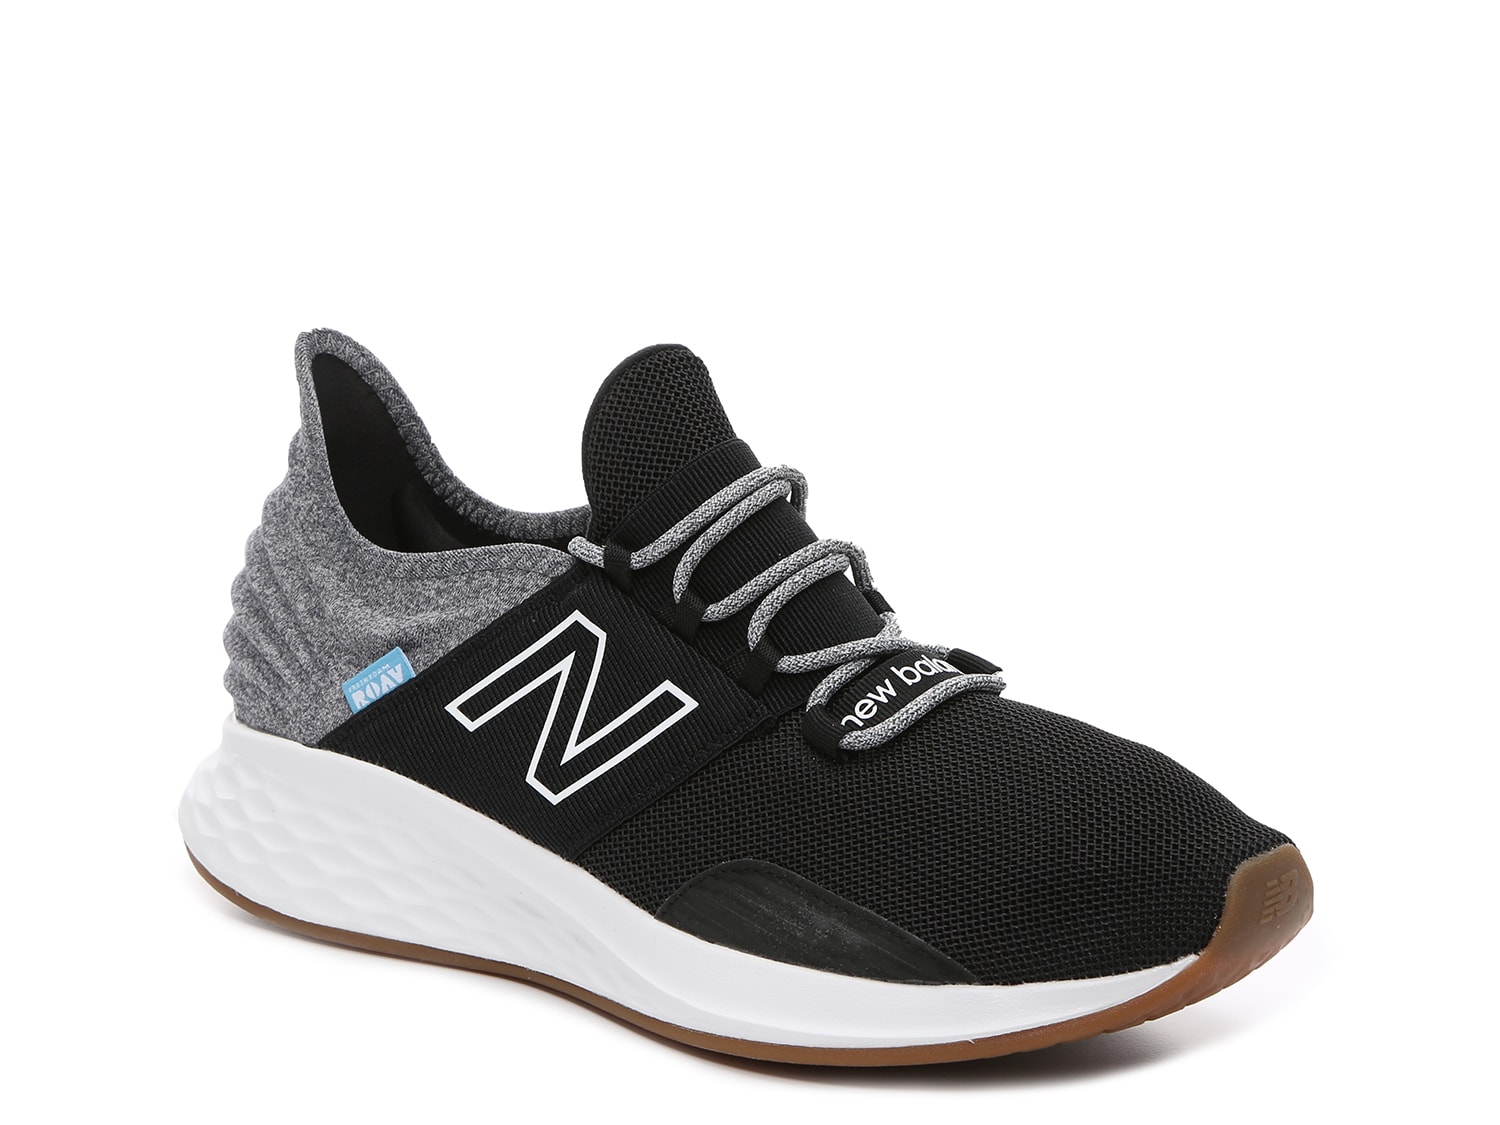 where can i buy new balance shoes near me